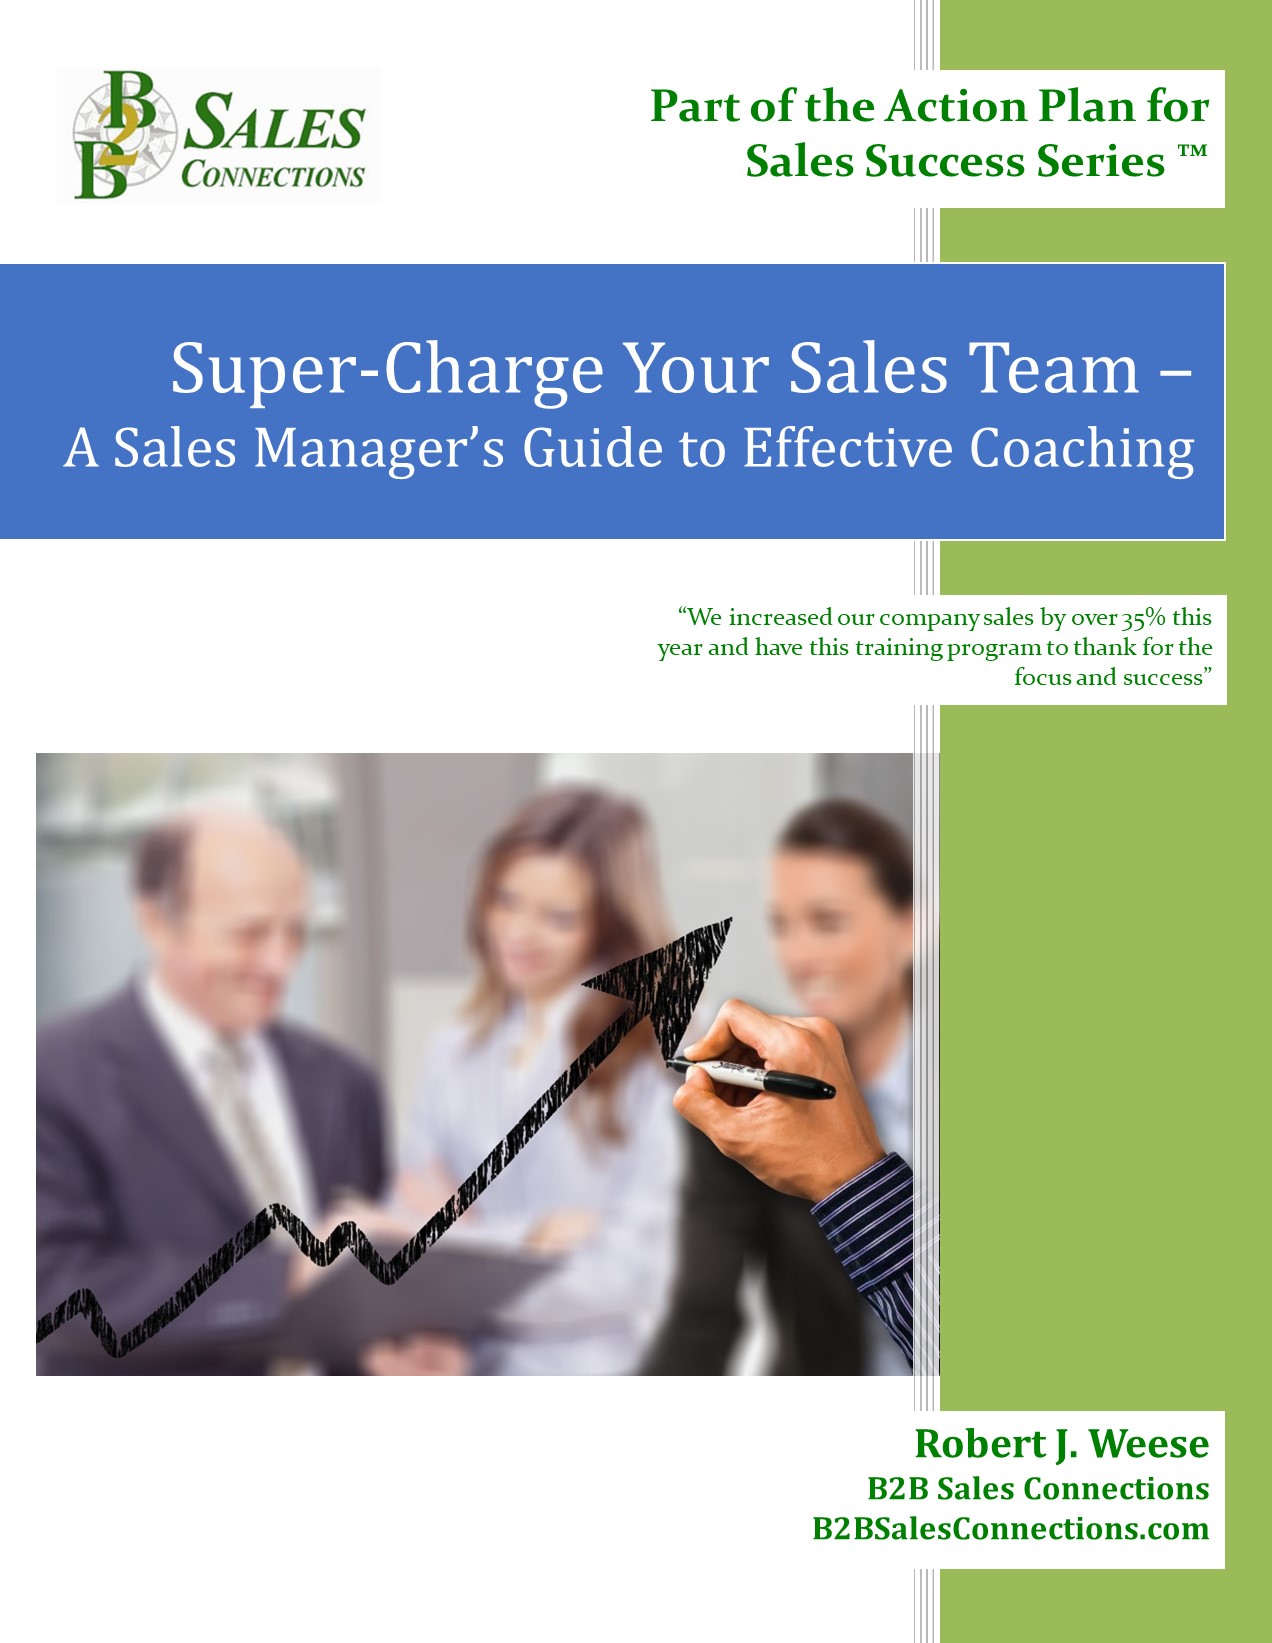 Super Charge Your Sales Team-A Sales Manager's Guide to Effective Coaching from B2B Sales Connections